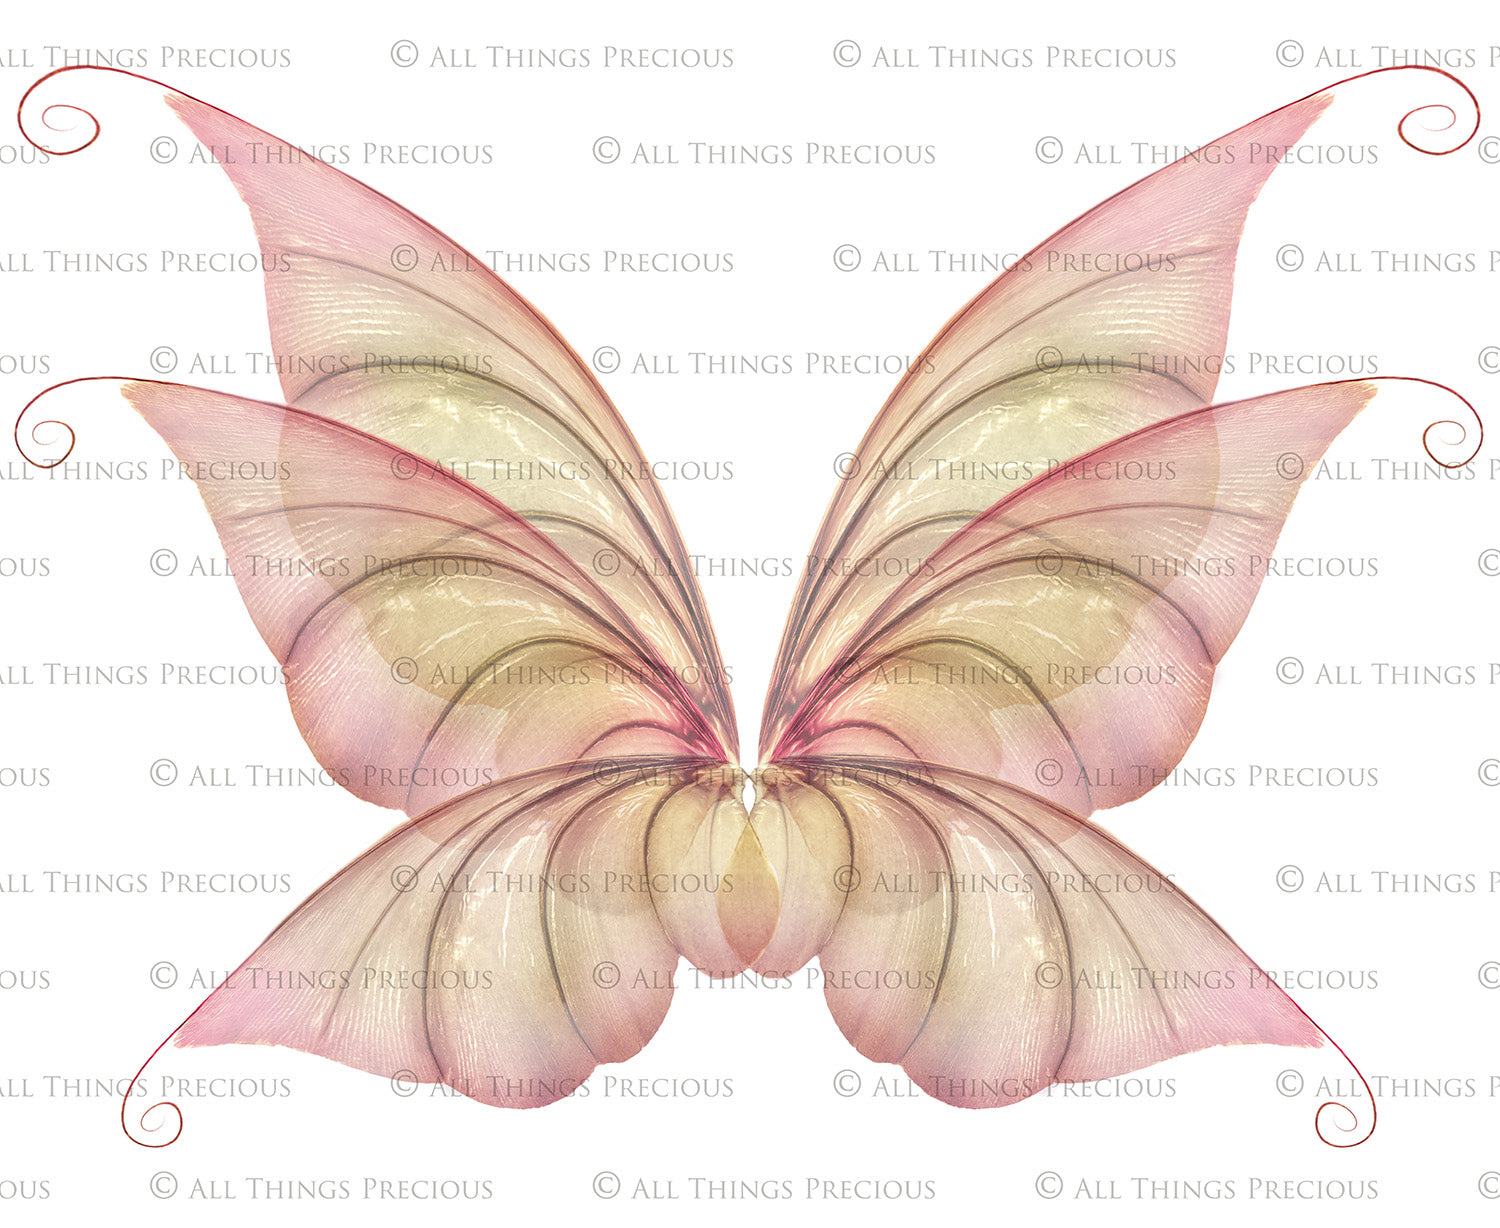 Digital Faery Wing Overlays. Png overlays for photoshop. Photography editing. High resolution, 300dpi fairy wings. Overlays for photography. Digital stock and resources. Graphic design. Fairy Photos. Colourful Fairy wings. Faerie Wings. ATP Textures. Overlays. Actions, Textures, Photo Resources, Photoshop. 